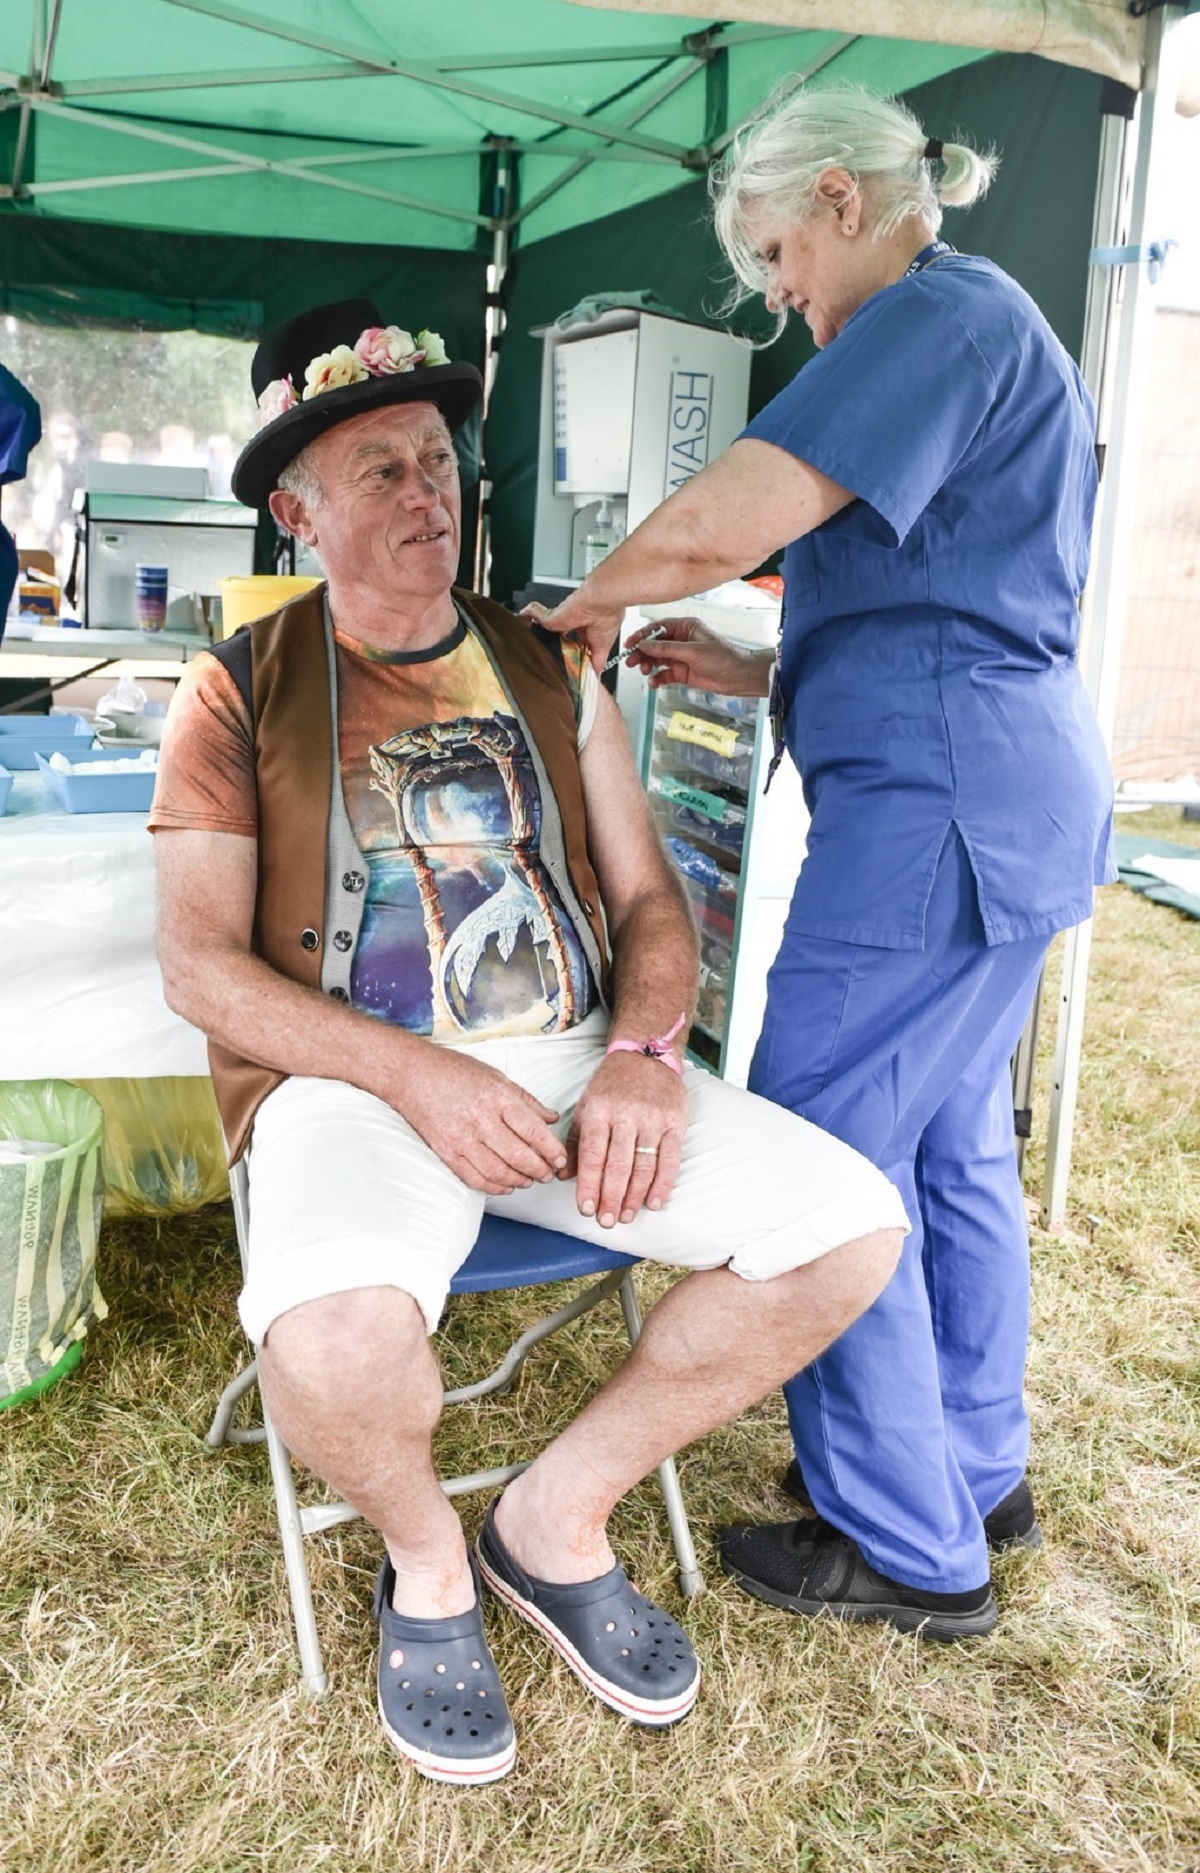 More than 100 people receive jabs at Lakefest